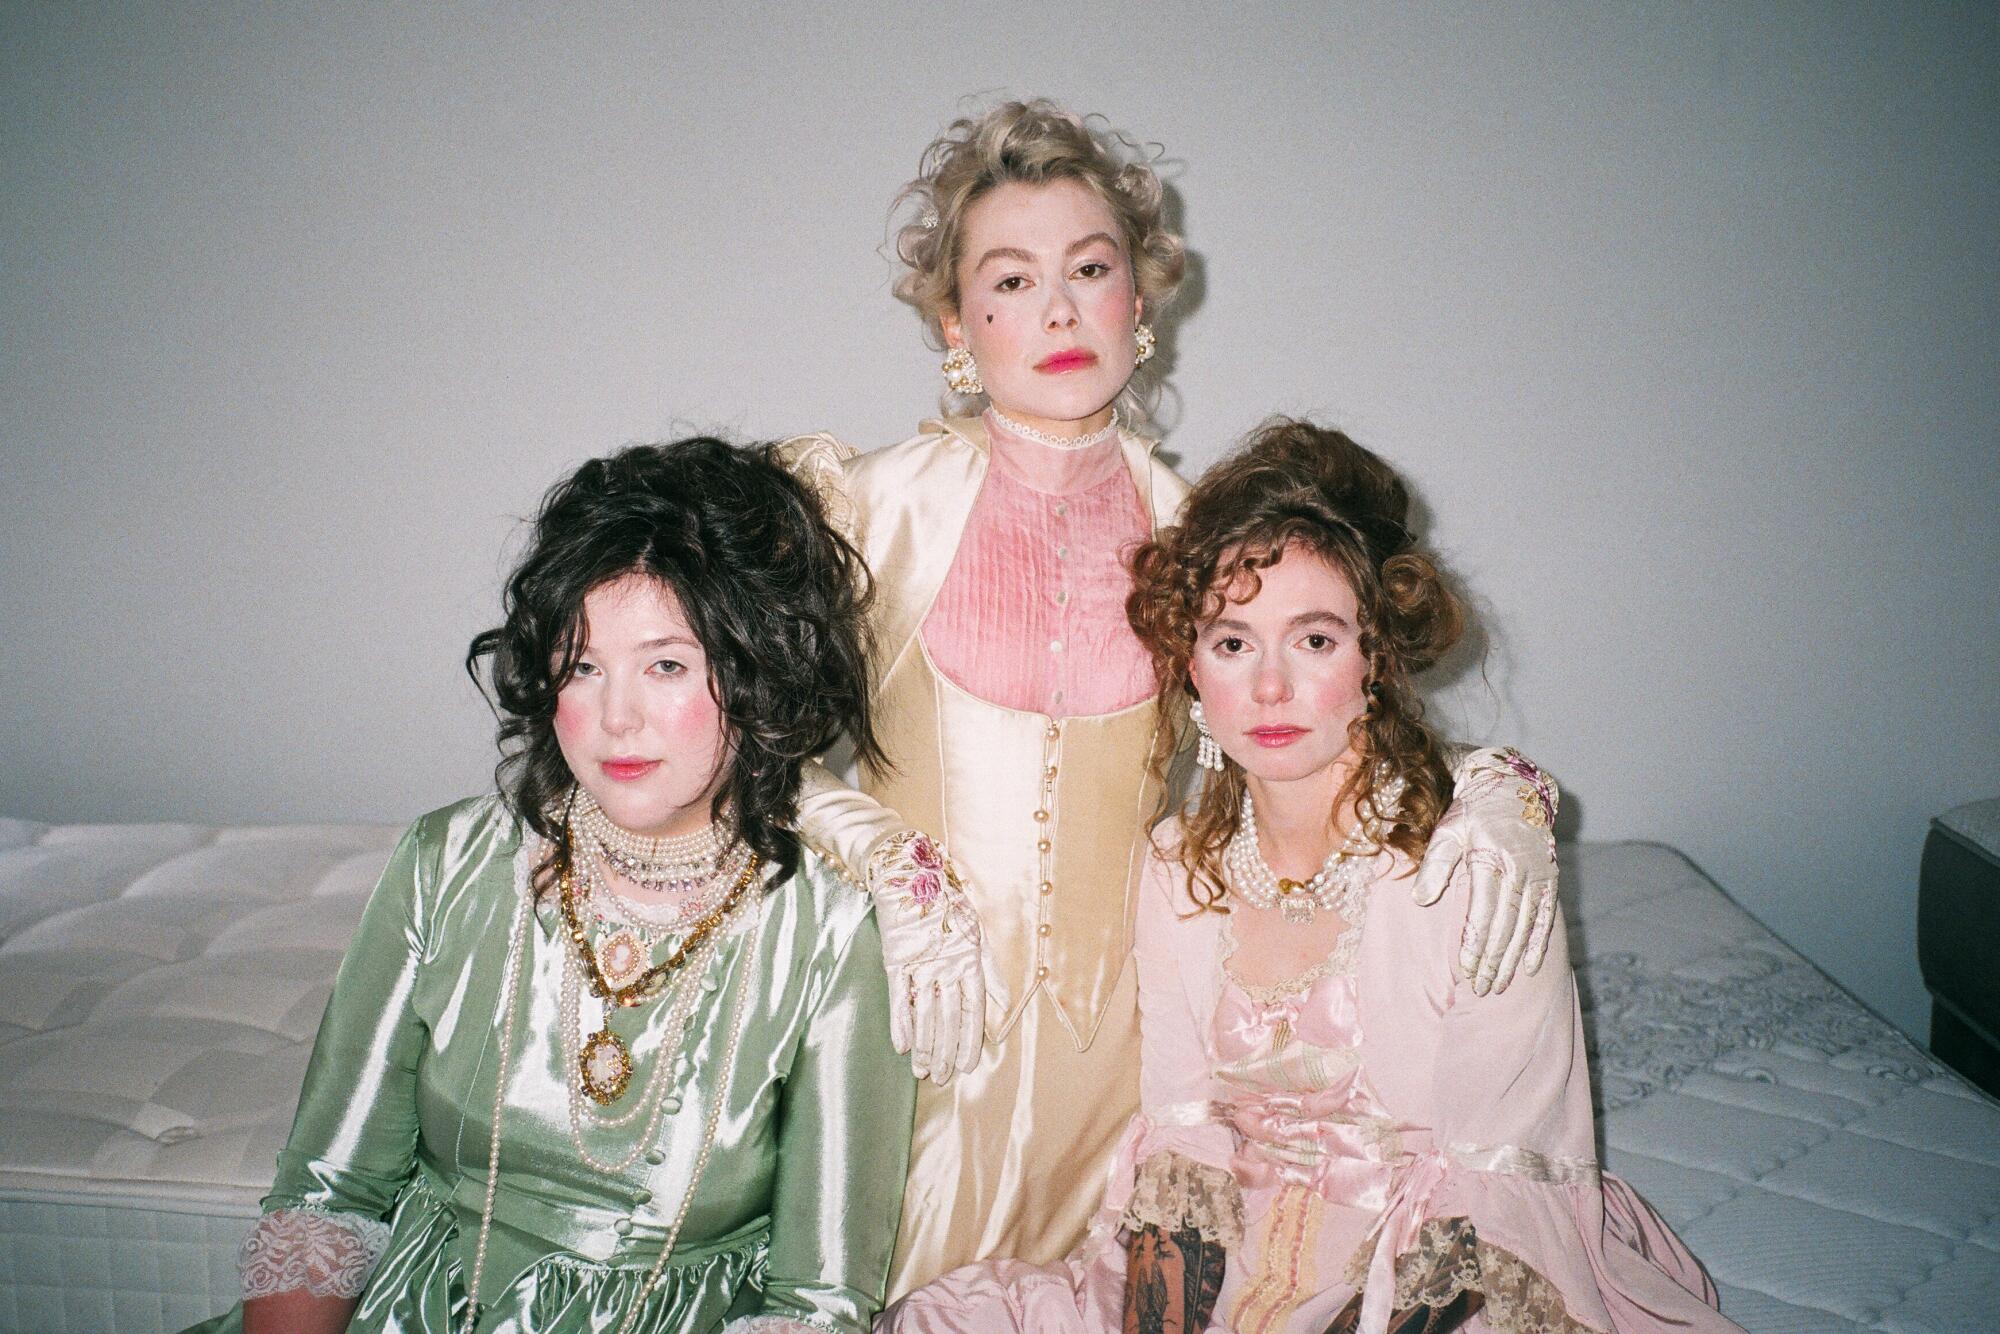 Lucy Dacus, Phoebe Bridgers and Julien Baker of Boygenius, heavily made up and dressed in Victorian gowns, sit on a mattress.